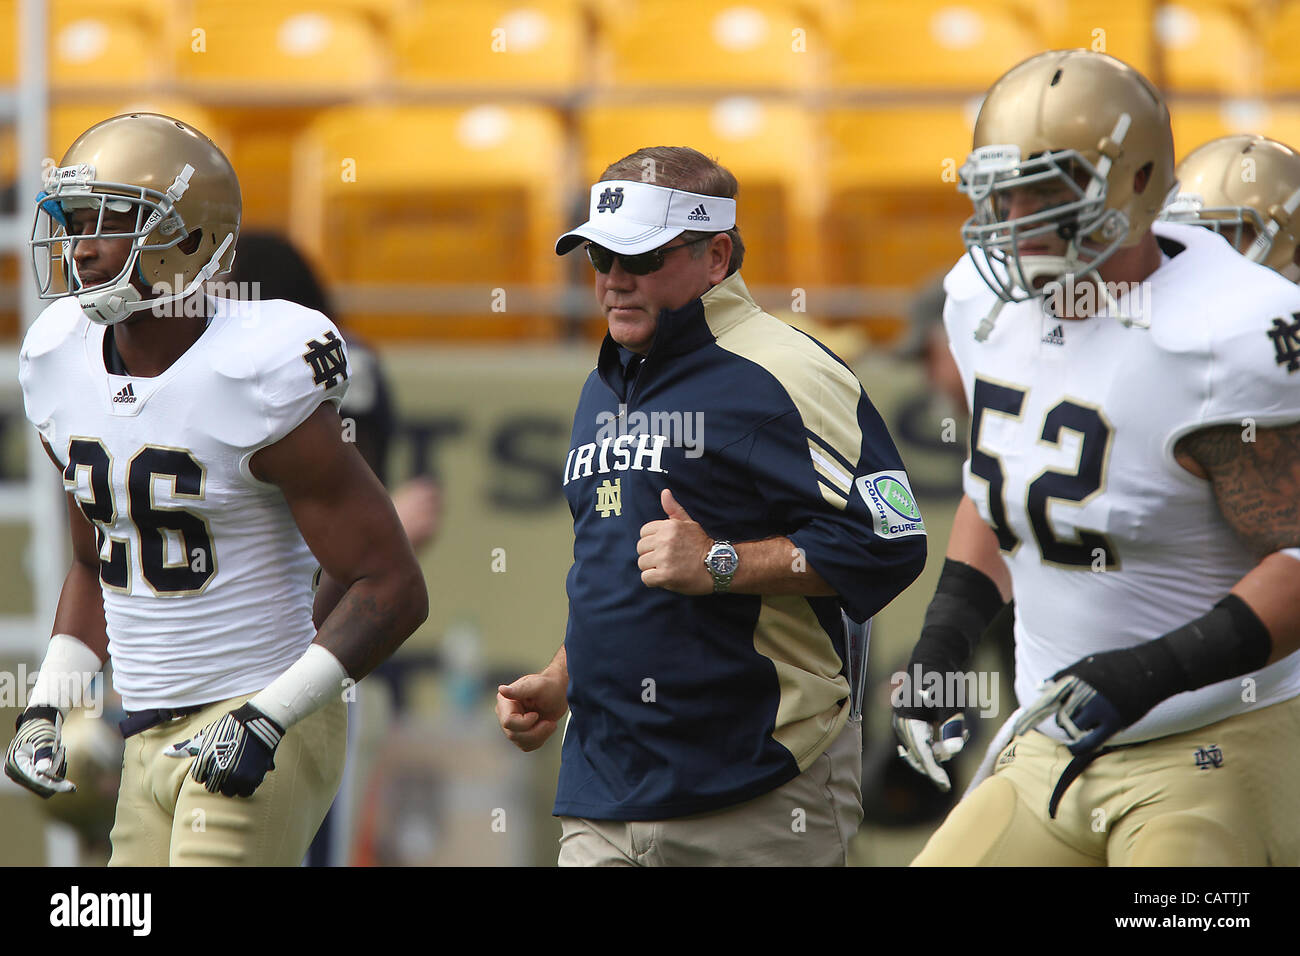 Sept. 23, 2011 - Pittsburgh, Pennsylvania, USA - Notre Dame head coach Brian Kelly. The Notre Dame Fighting Irish were able to hold onto a slight lead to beat the University of Pittsburgh Panthers in Hienz Field.  Photo By Aaron Suozzi (Credit Image: © Aaron Souzzi/ZUMAPRESS.com) Stock Photo